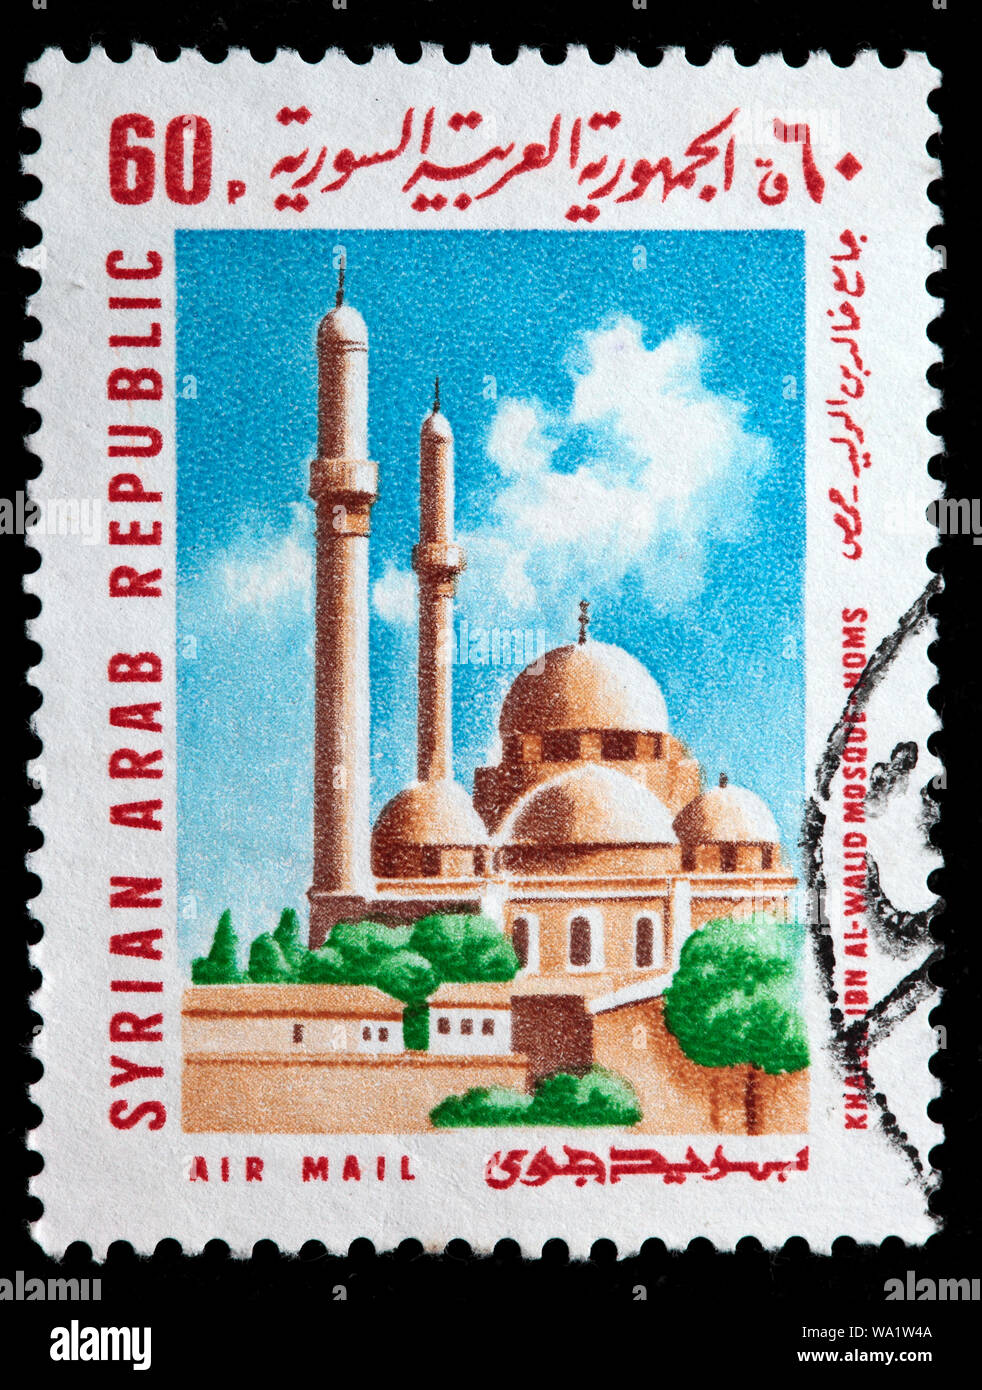 Khalid ibn al-Walid Mosque, Homs, postage stamp, Syria, 1969 Stock Photo